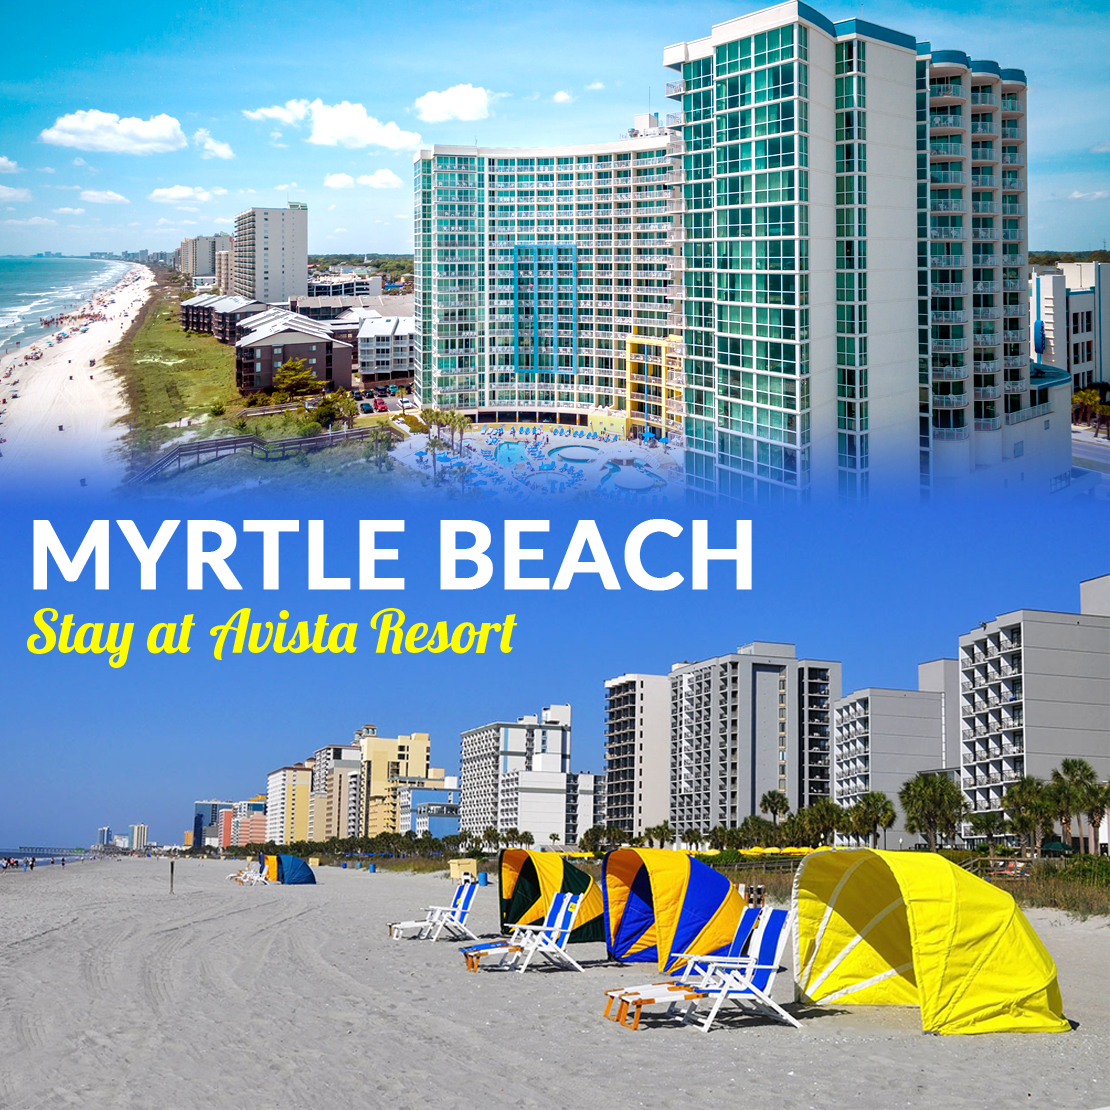 Myrtle Beach Deluxe - Maple Leaf Tours Reservations